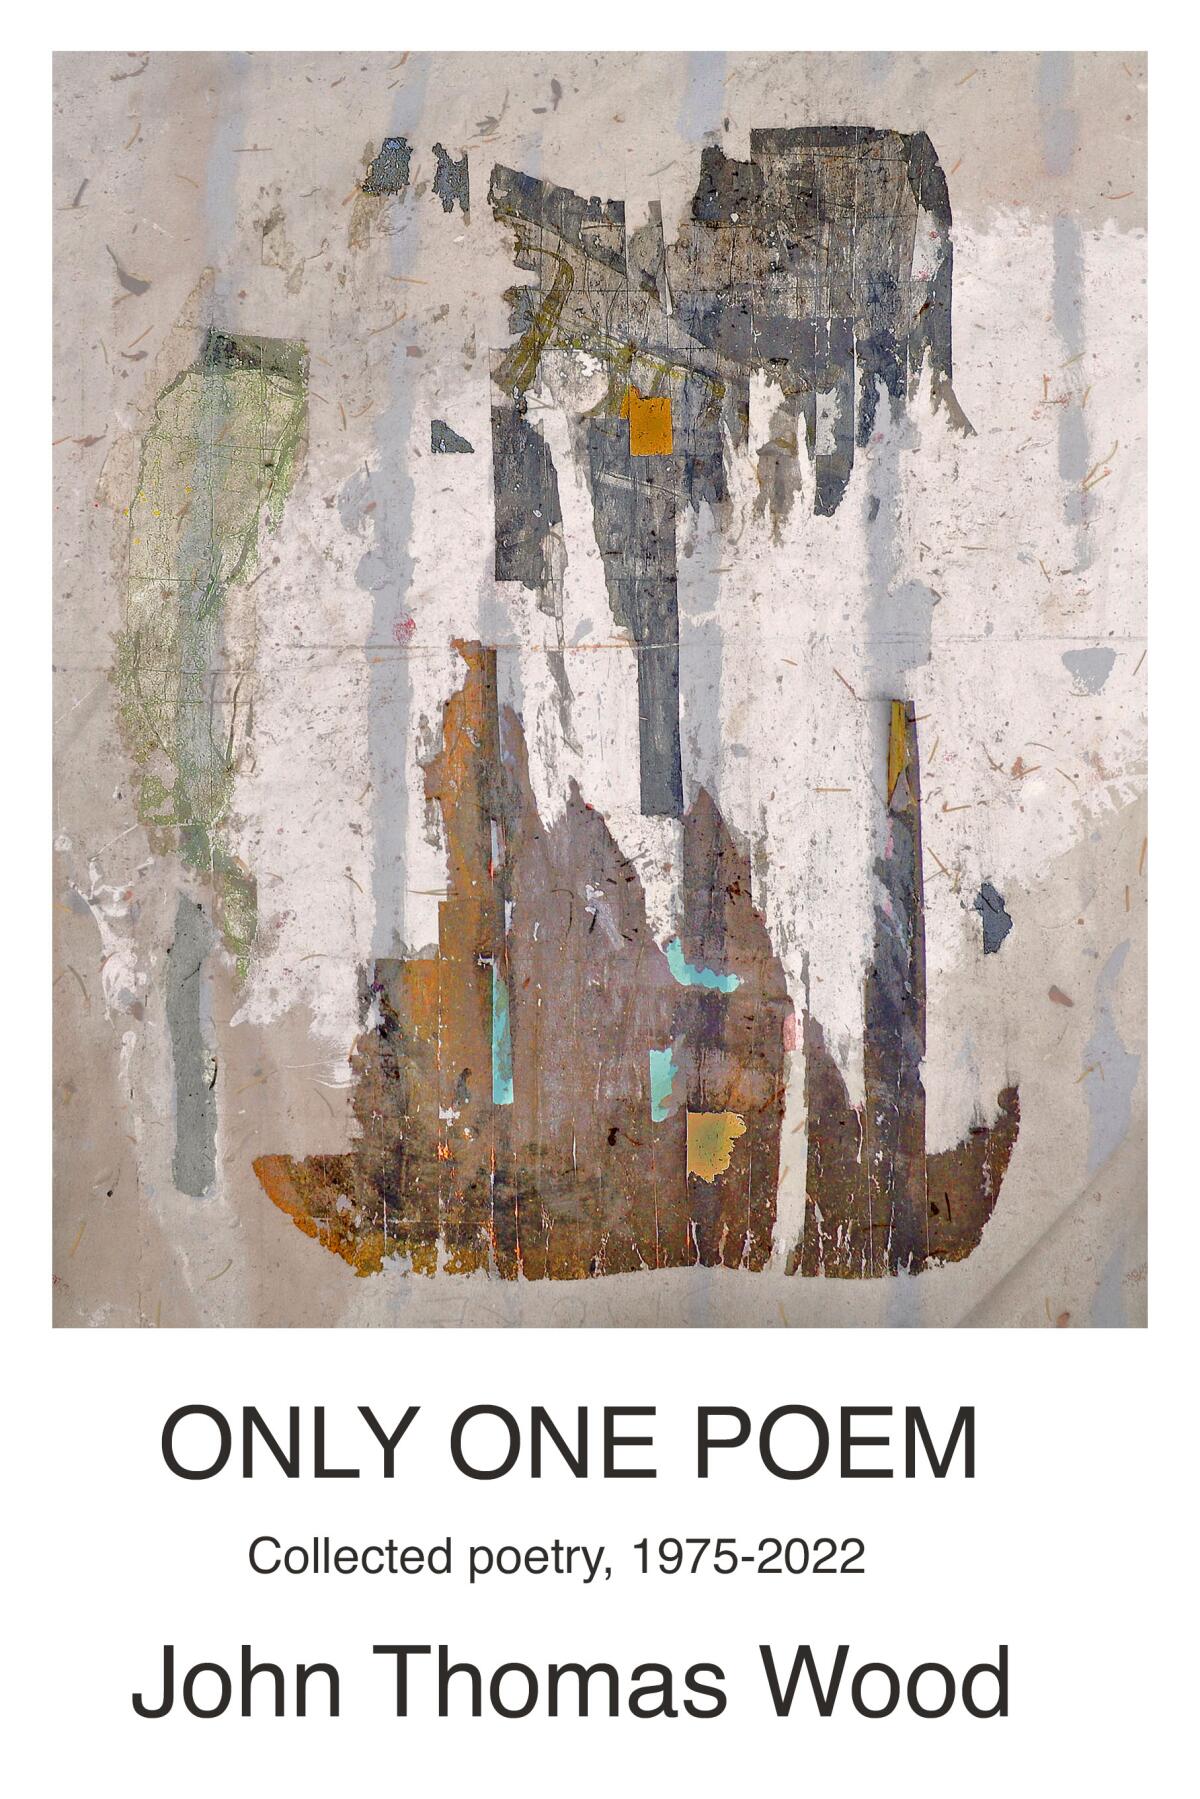 The cover of John Thomas Wood's "Only One Poem" features his photograph “The Orphan.”